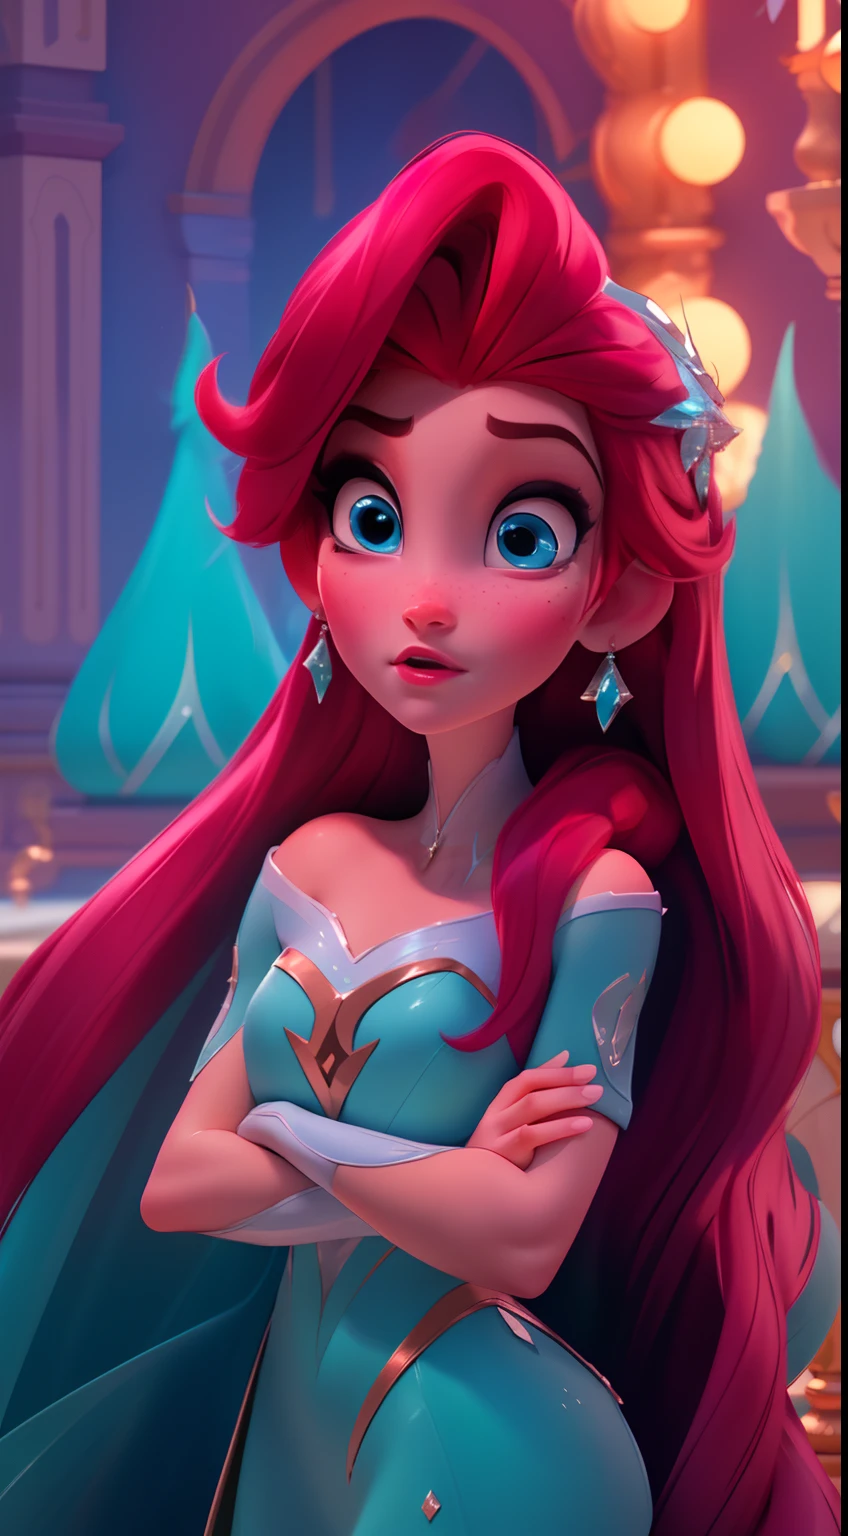 Elsa-Ariel Fusion, Merging models, melting, Ariel&#39;s clothes, 1girl, Beautiful, character, Woman, female, (master part:1.2), (best qualityer:1.2), (standing alone:1.2), ((struggling pose)), ((field of battle)), cinemactic, perfects eyes, perfect  skin, perfect lighting, sorrido, Lumiere, Farbe, texturized skin, detail, Beauthfull, wonder wonder wonder wonder wonder wonder wonder wonder wonder wonder wonder wonder wonder wonder wonder wonder wonder wonder wonder wonder wonder wonder wonder wonder wonder wonder wonder wonder wonder wonder wonder wonder, ultra detali, face perfect